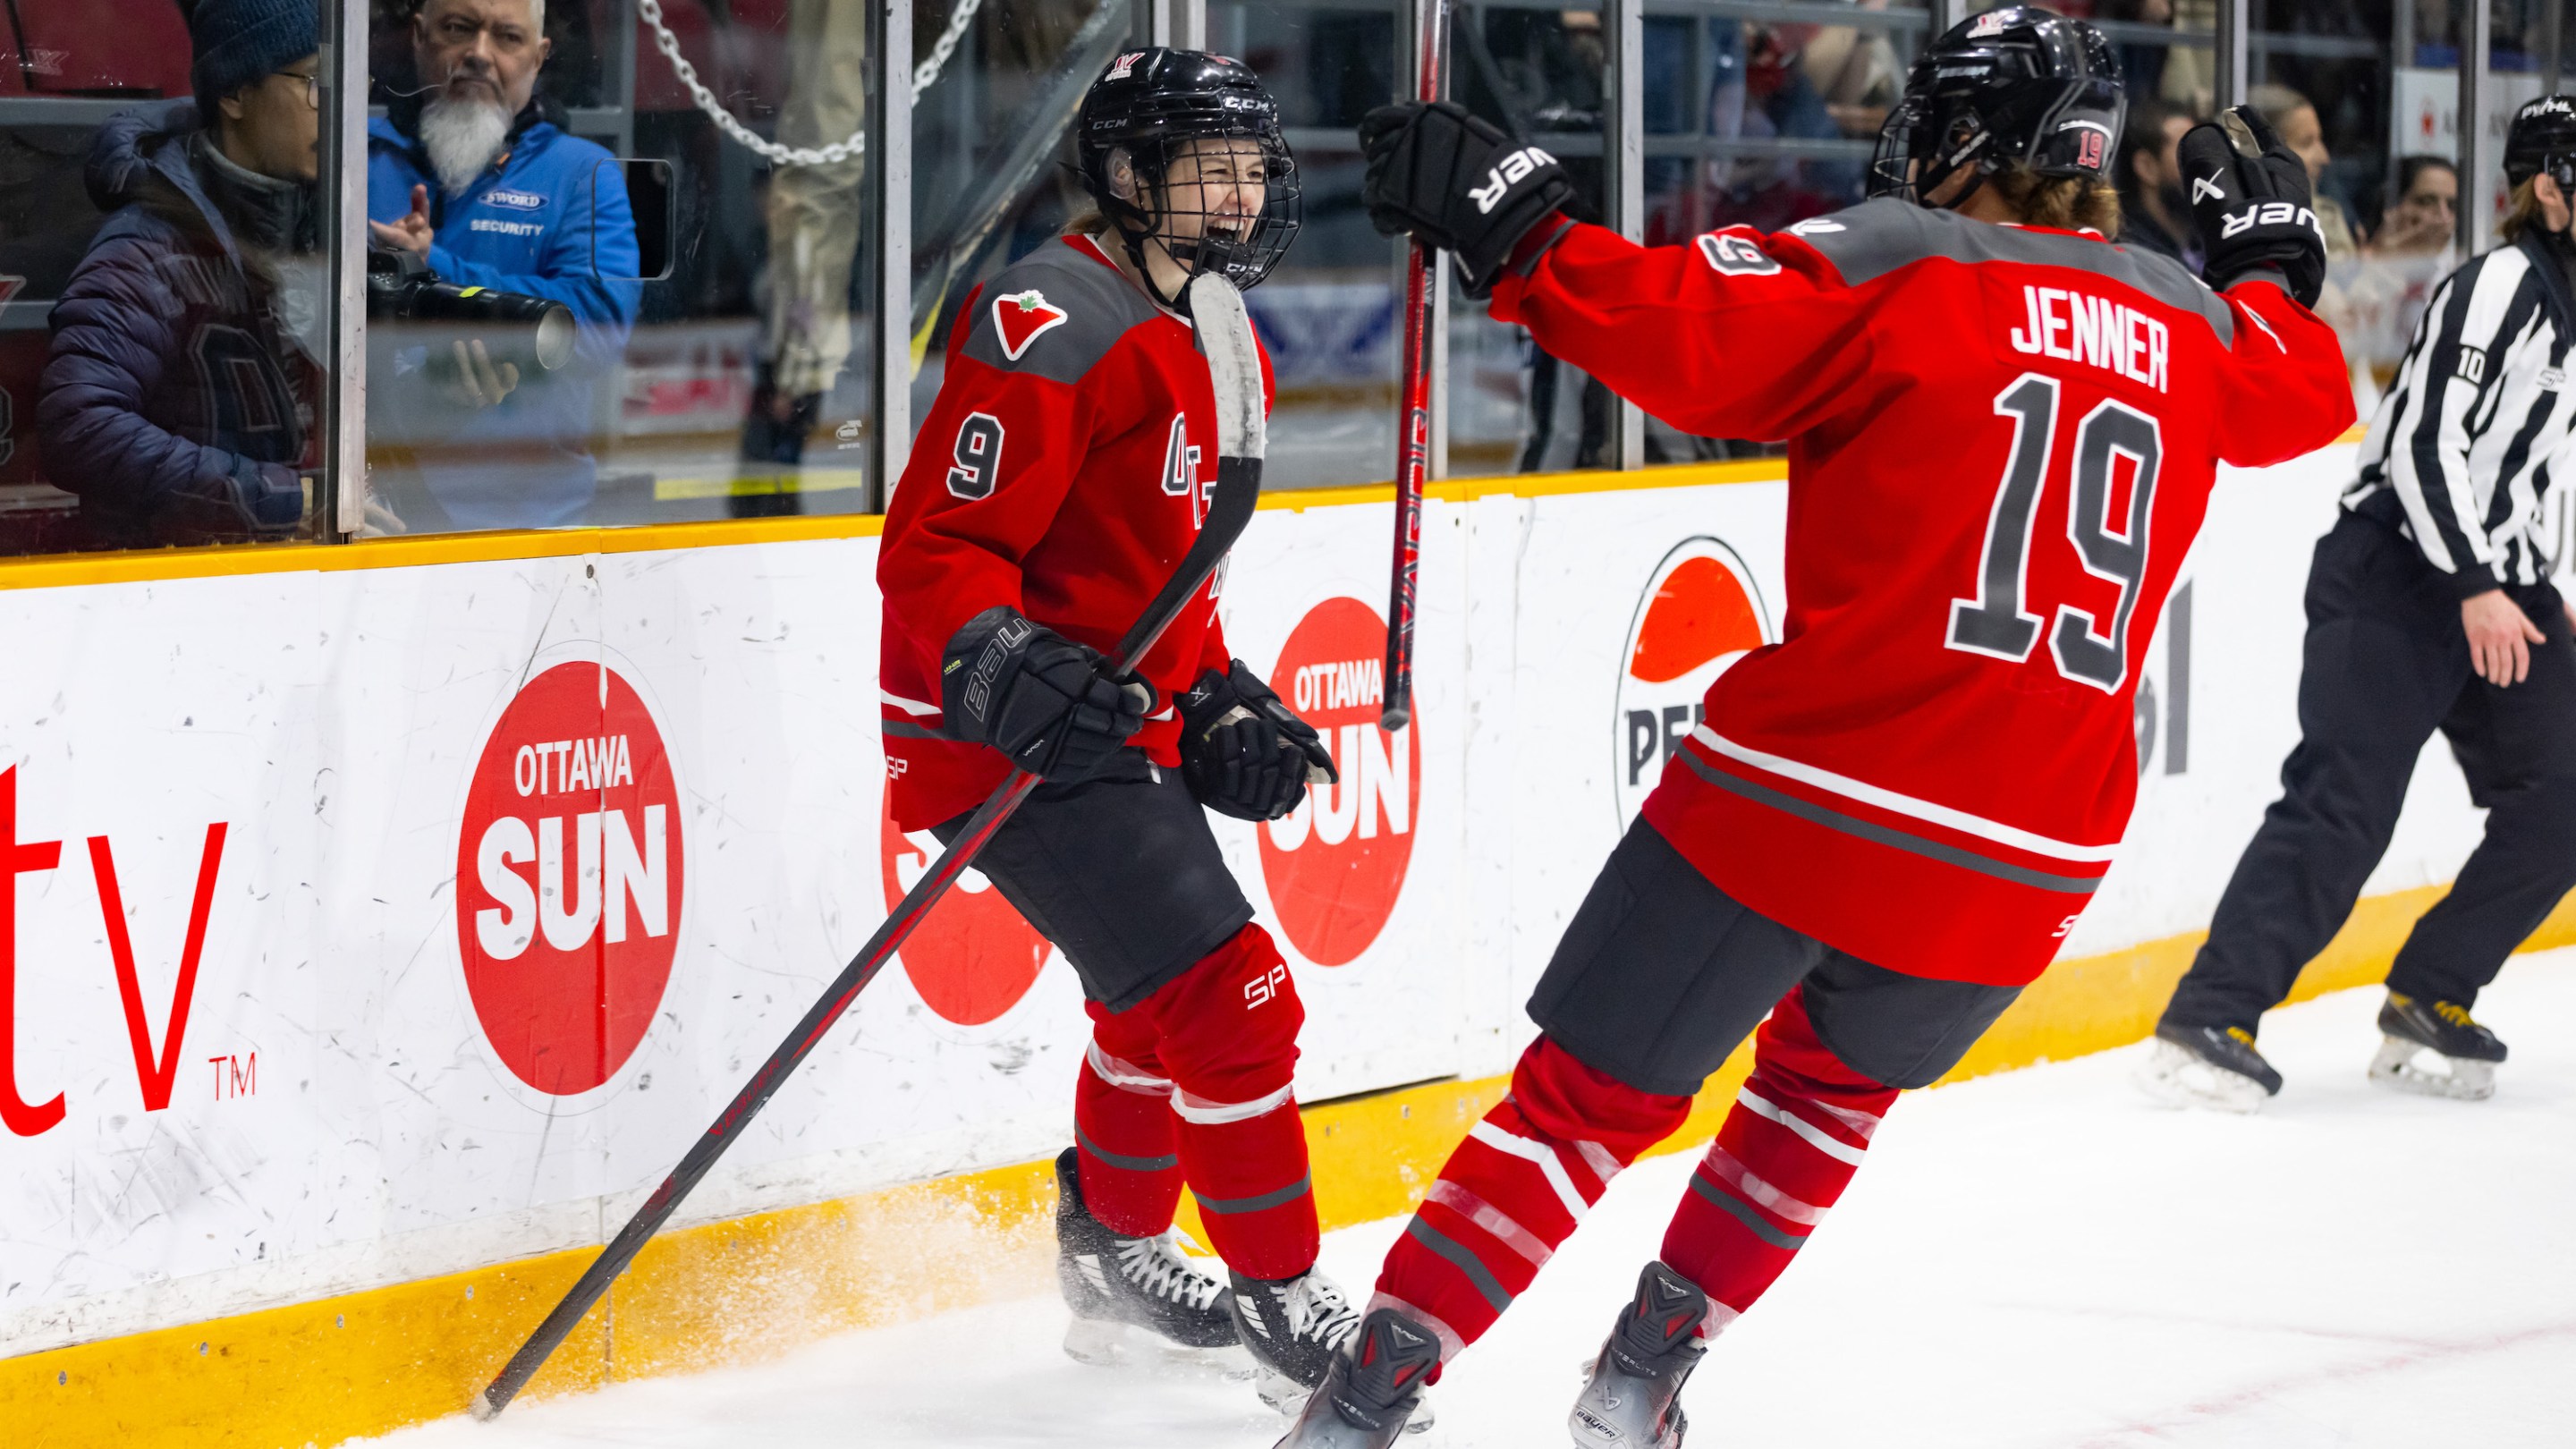 Ottawa Forward Daryl Watts (9) celebrates her goal with Forward Brianne Jenner (19) during second period Professional Women's Hockey League (PWHL) action between Toronto and Ottawa on March 23, 2024, at TD Place Arena in Ottawa, ON, Canada.